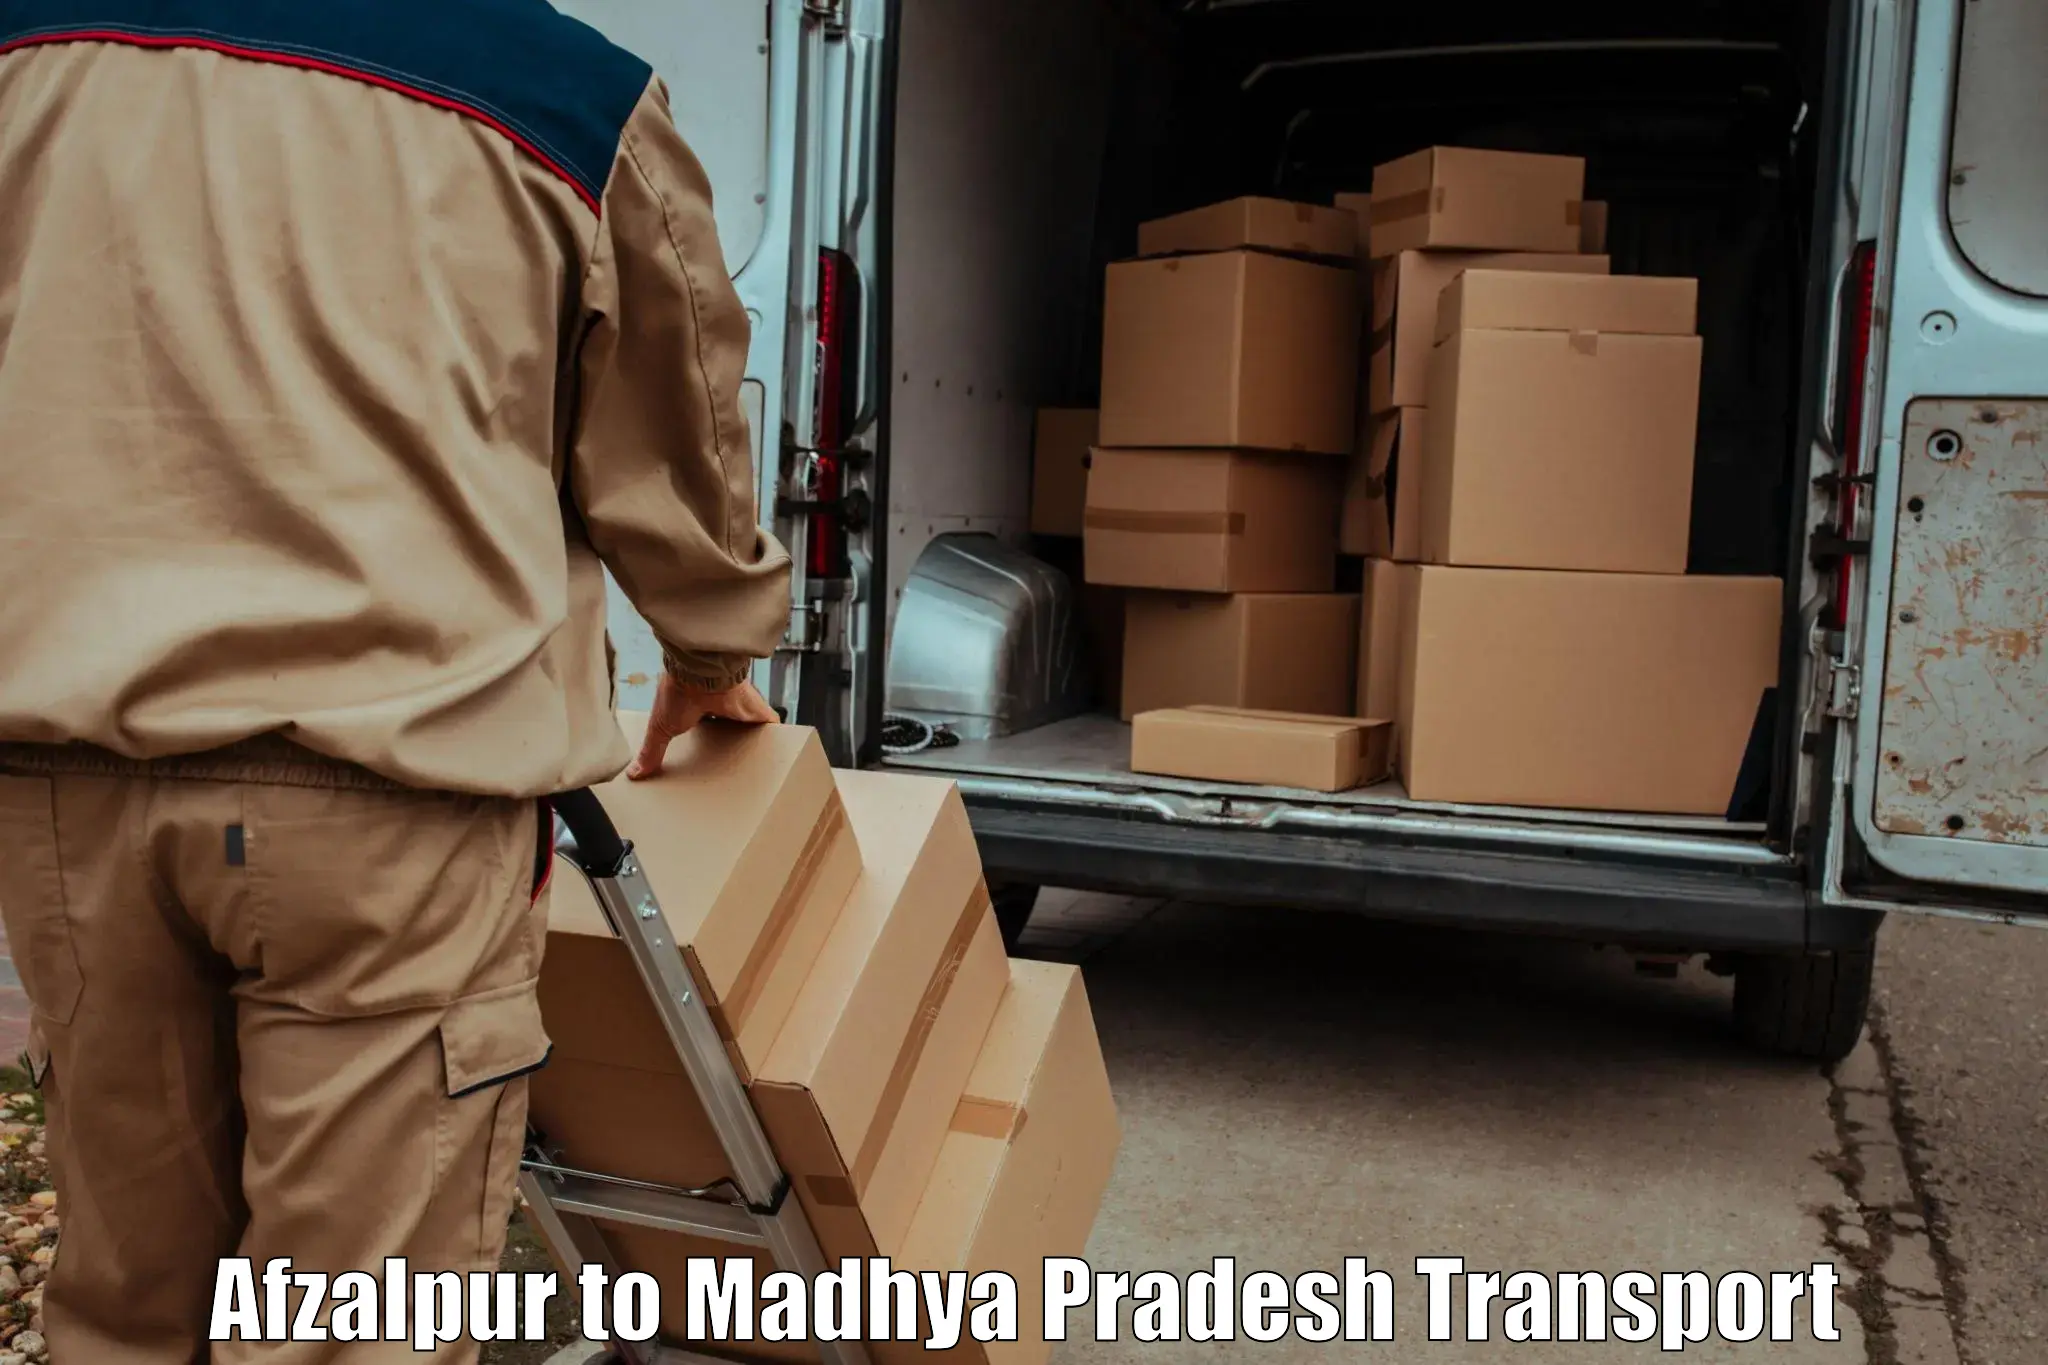 Container transport service Afzalpur to Neemuch